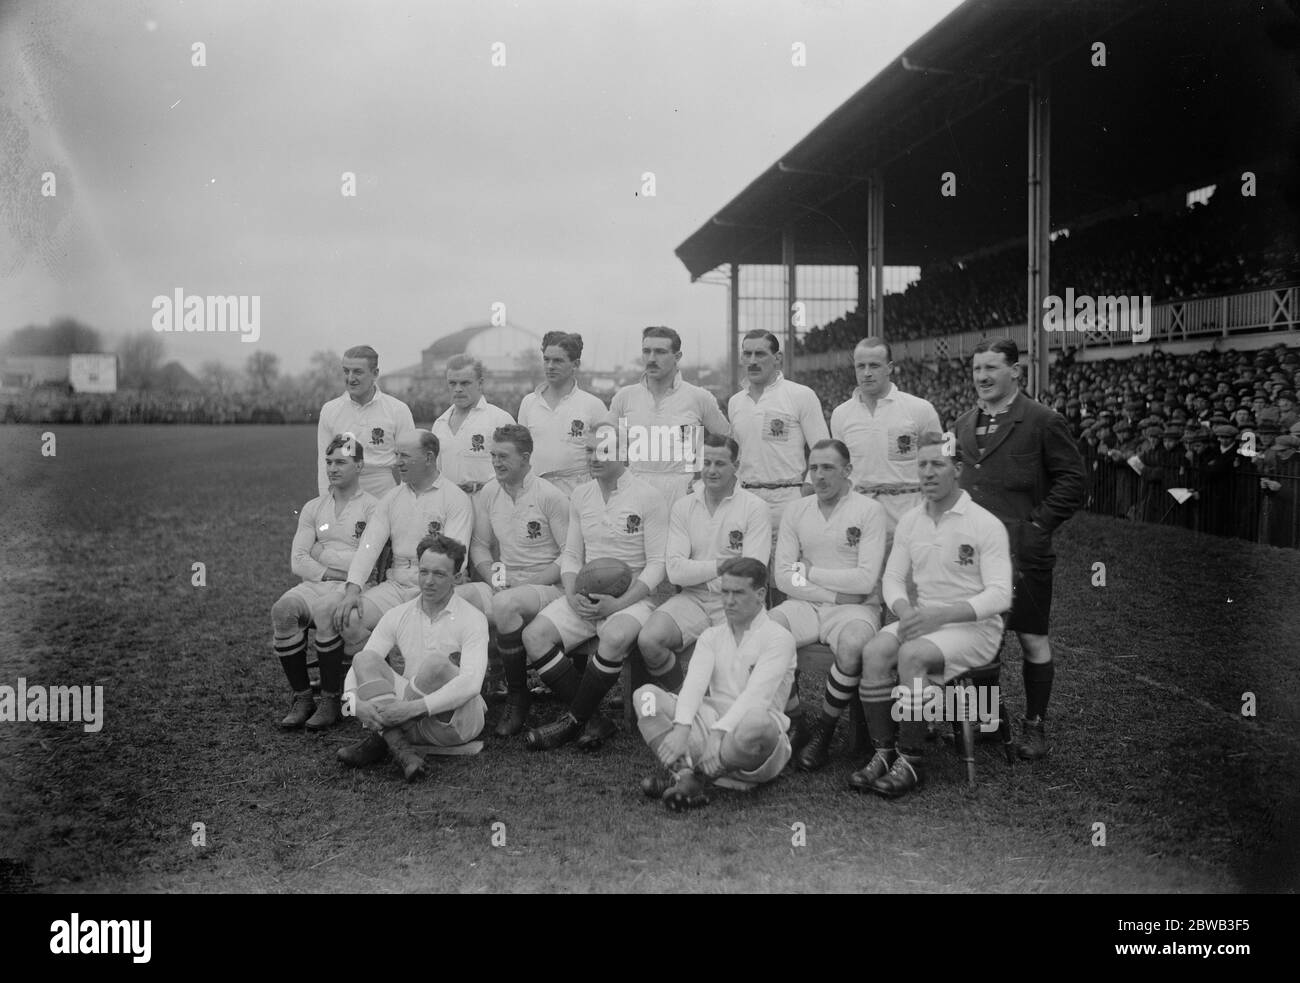 Five Nations - Swansea, 19 January 1924 Wales 9 - 17 England England Team no order Bevan Chantrill , Carston Catcheside , Leonard Corbett , Harold Locke , Jake Jacob , Edward Myers , Arthur Young , Reg Edwards , Alan Robson , William Luddington , Ron Cove-Smith , Wavell Wakefield (c) , Freddie Blakiston , Geoffrey Conway and Tom Voyce England Test debuts HC Catcheside, BS Chantrill, HP Jacob, A Robson, AT Young 19 January 1924 Stock Photo